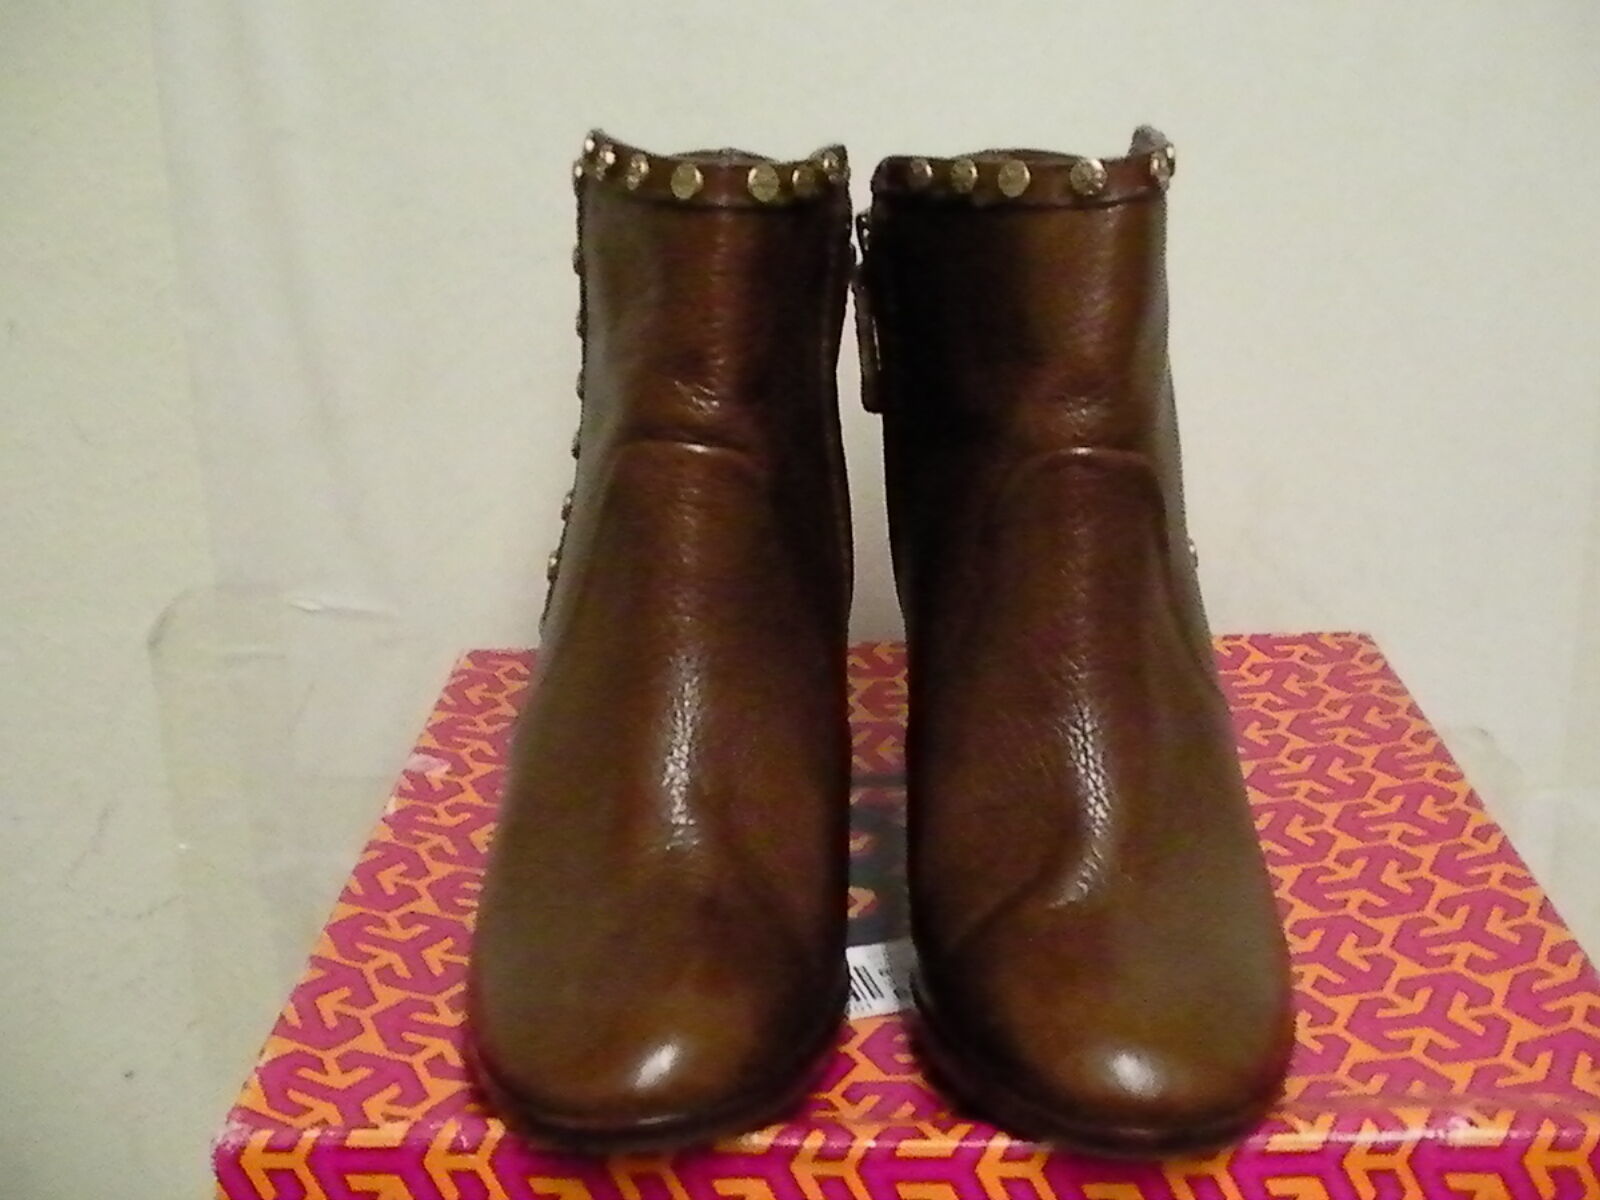 Tory burch women boots almond 90mm bootie tumbled ankle leather size 8.5 - $291.99